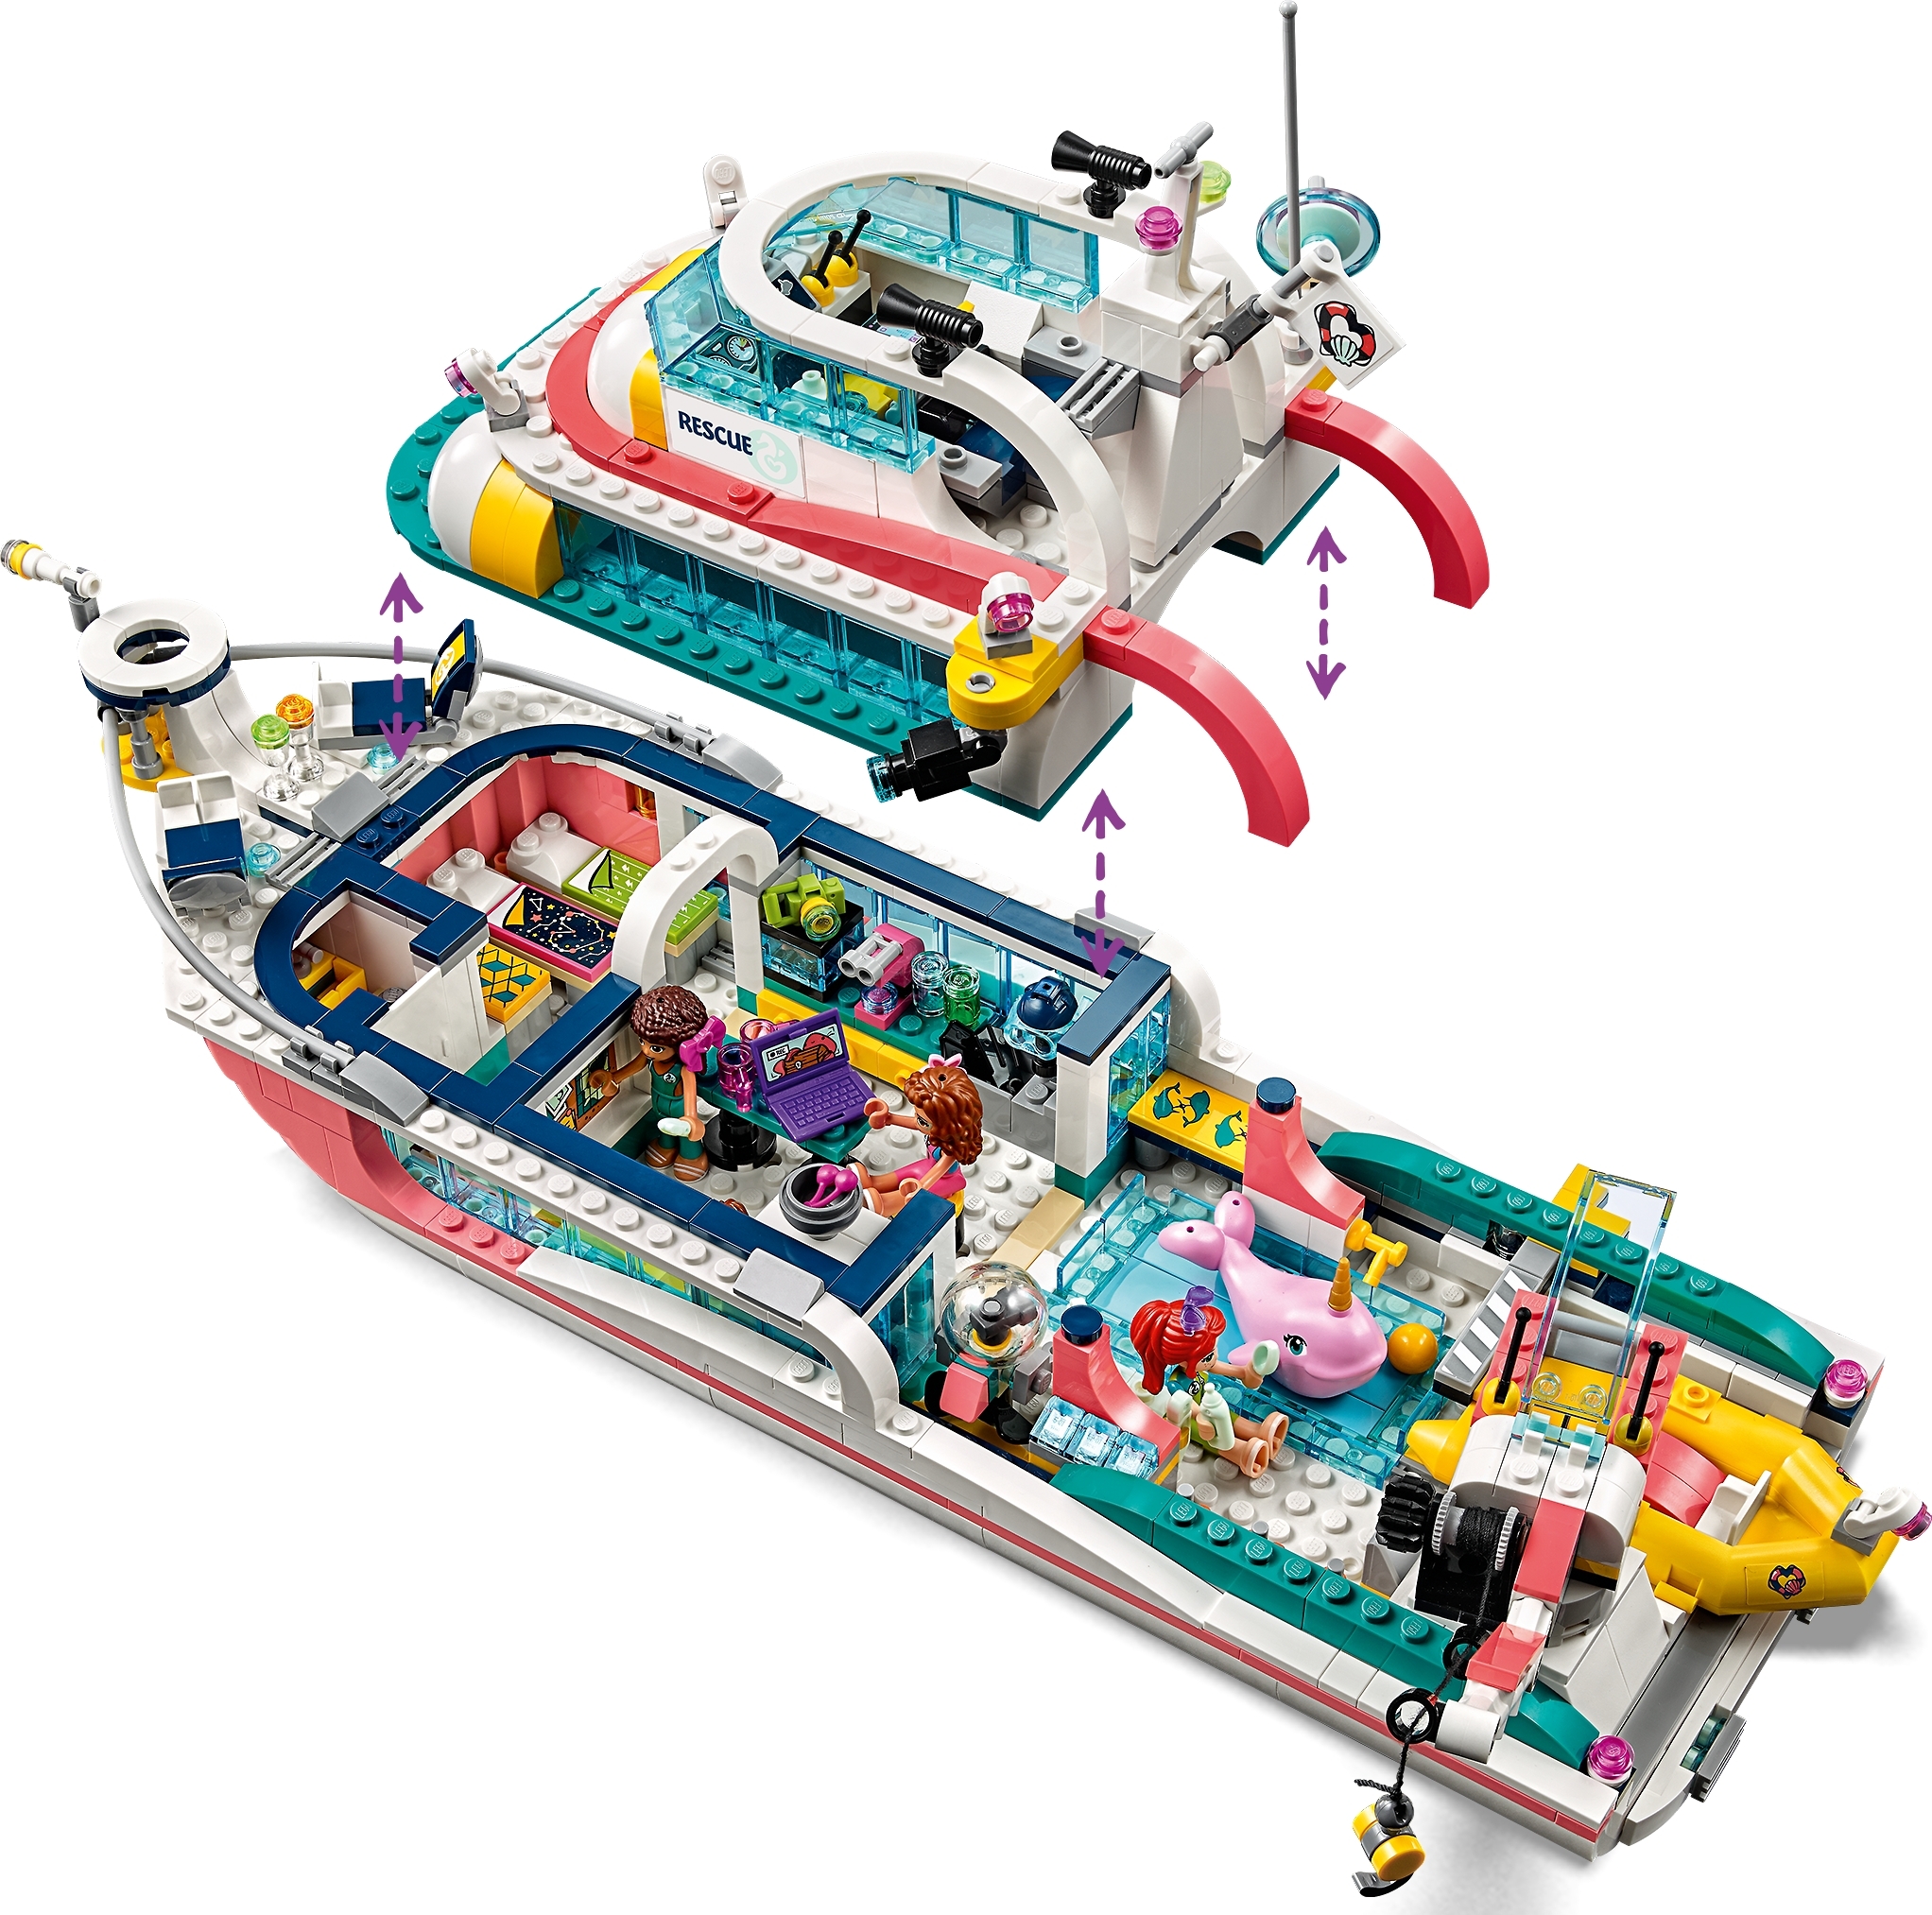 Rescue Mission Boat 41381 | Friends Buy online at the Official LEGO® Shop US